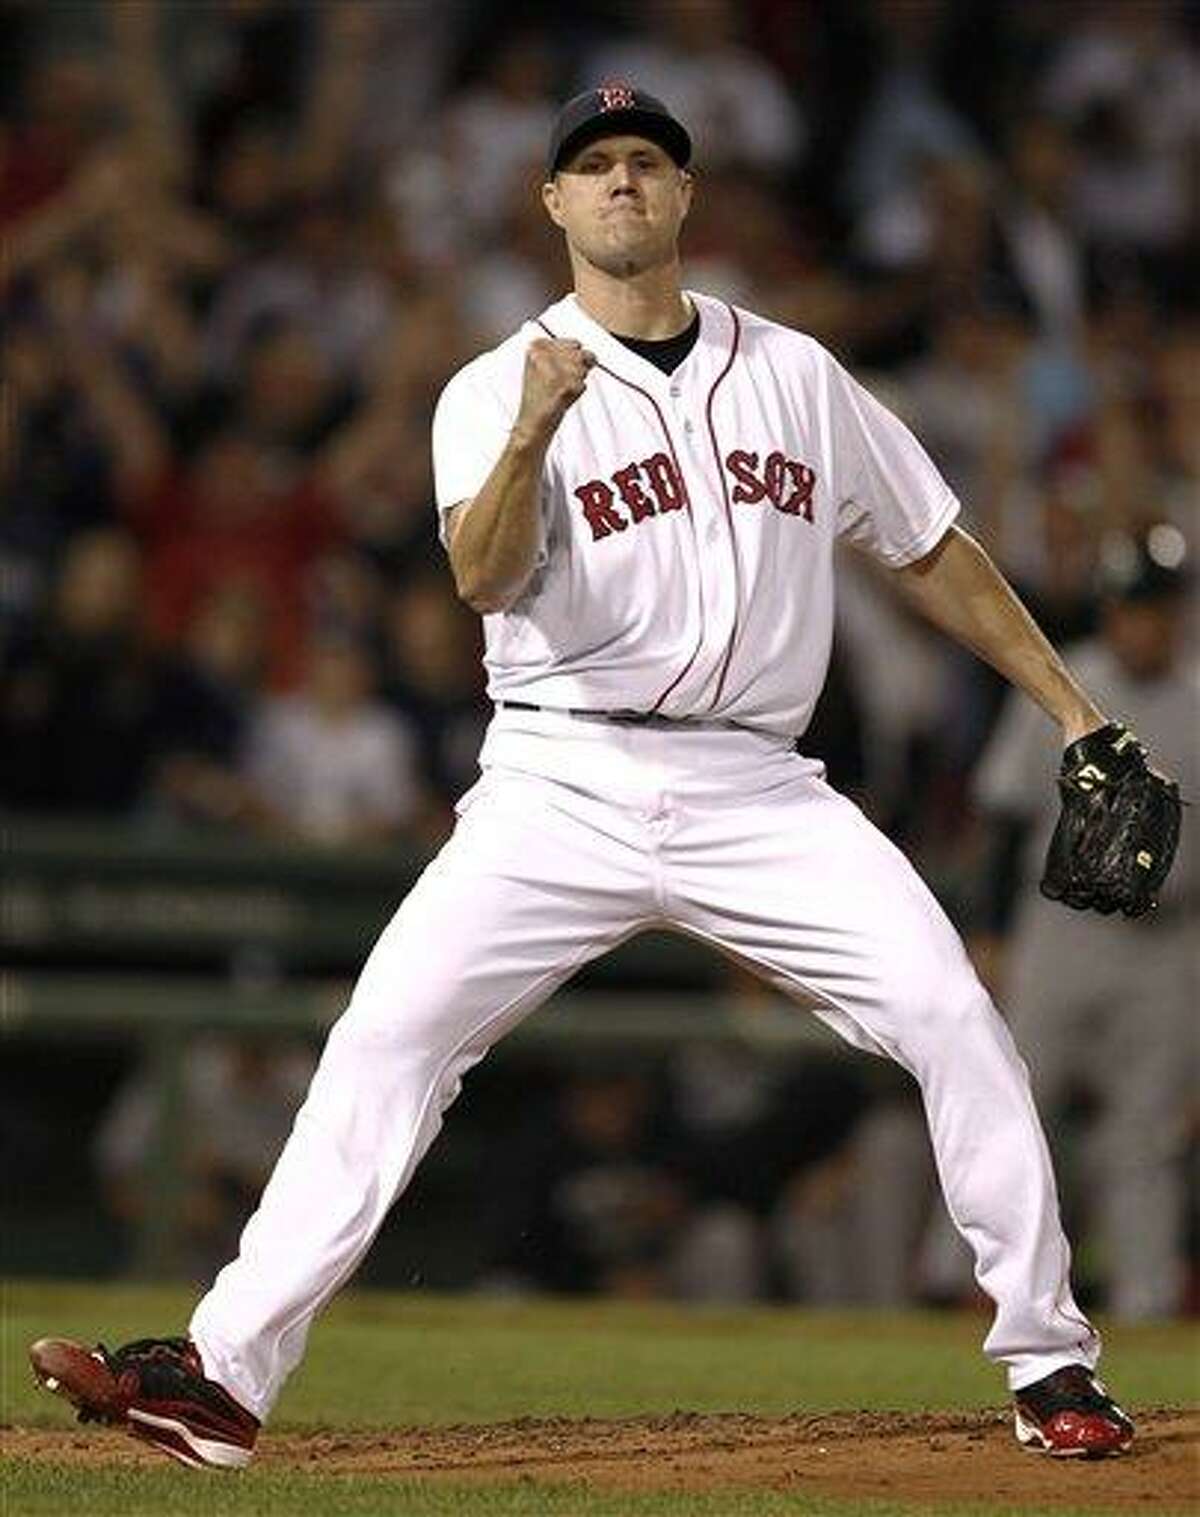 Boston Red Sox relief pitcher Jonathan Papelbon pumps his fist after striking out New York Yankees' Brett Gardner to end the baseball game at Fenway Park in Boston Wednesday, Aug. 31, 2011. Boston won 9-5. (AP Photo/Winslow Townson)